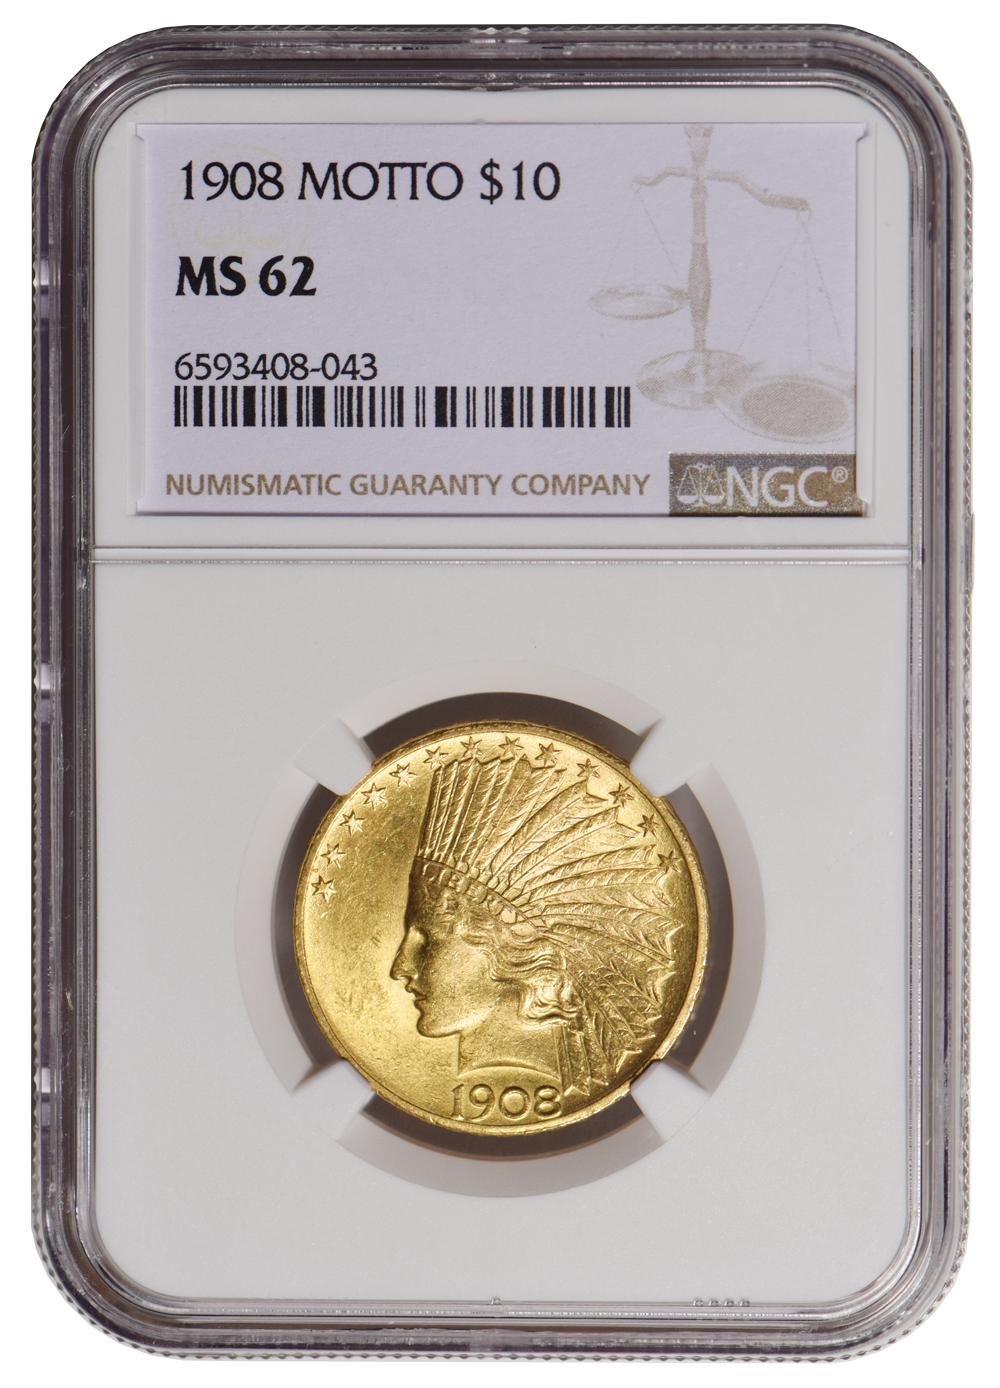 1908 $10 Indian Head Eagle Gold Coin NGC MS62